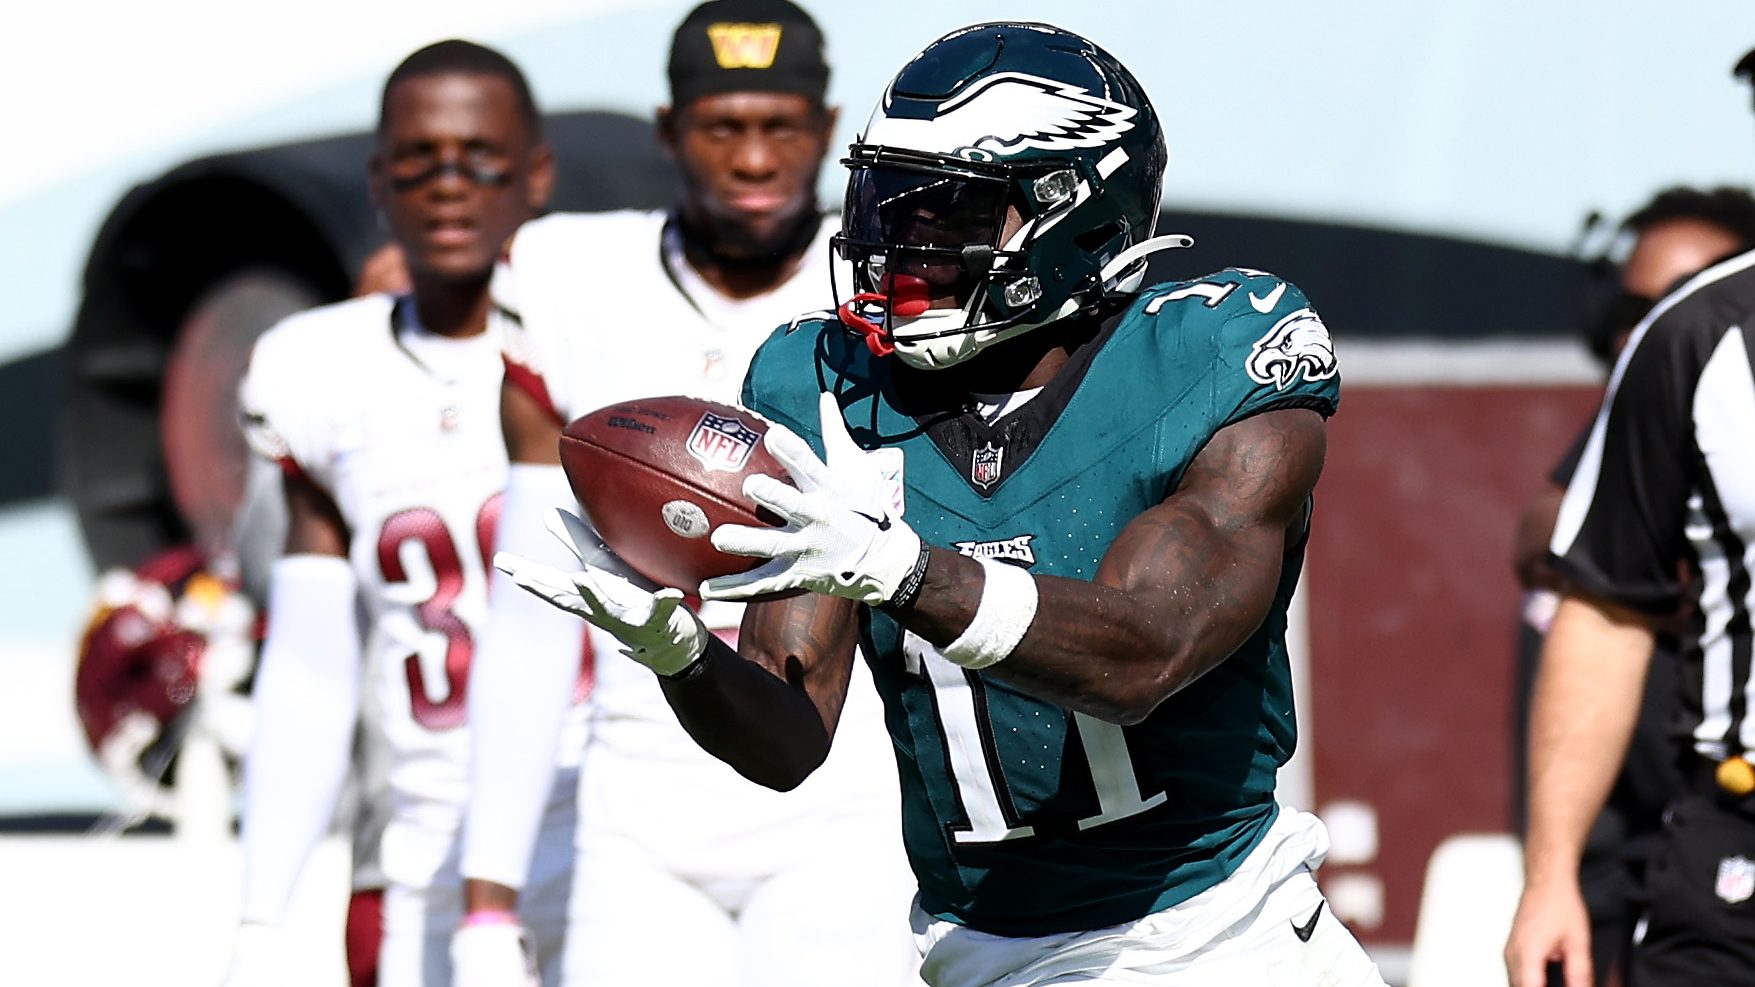 Philadelphia Eagles head coach Nick Sirianni praises Eagles wide receiver  A.J. Brown after his monster game in the team's 'Sunday Night Football' win  vs. Miami Dolphins